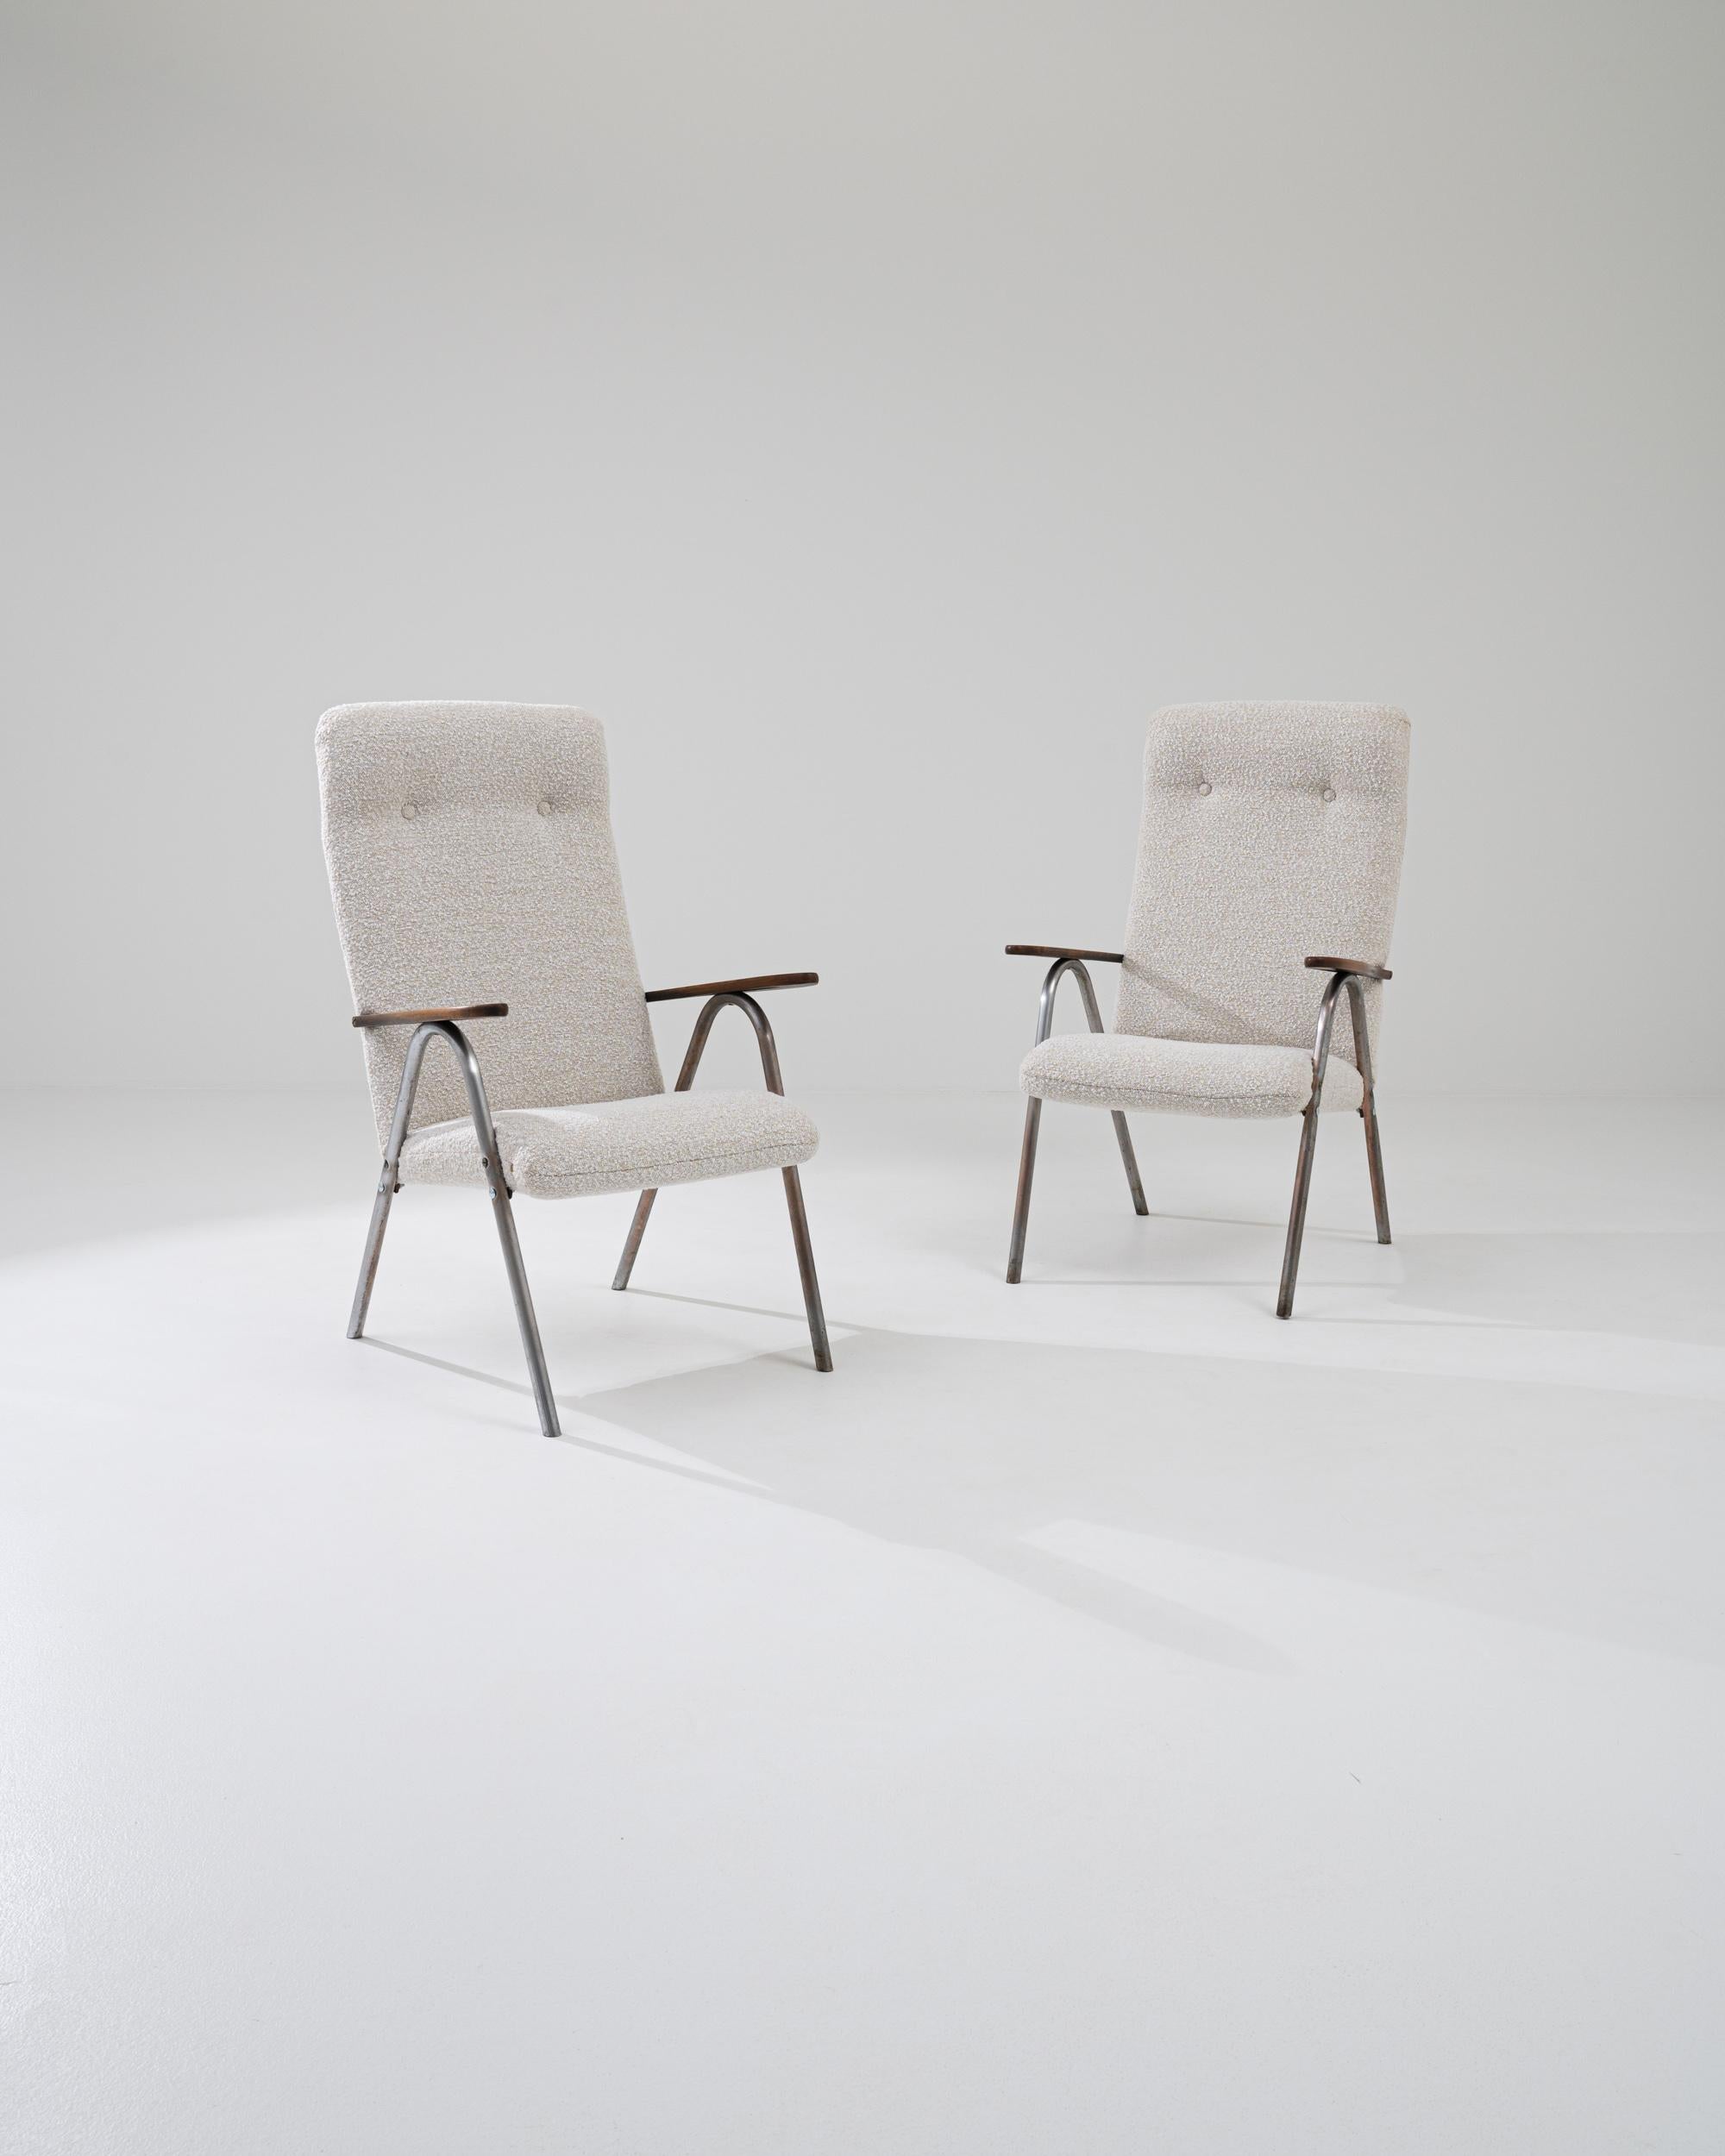 With their clean, graphic form, this pair of vintage armchairs offer an impeccably stylish accent. Made in the 20th century, the design is typical of the unique Central European Modern aesthetic—the influence of the Bauhaus school is clearly visible